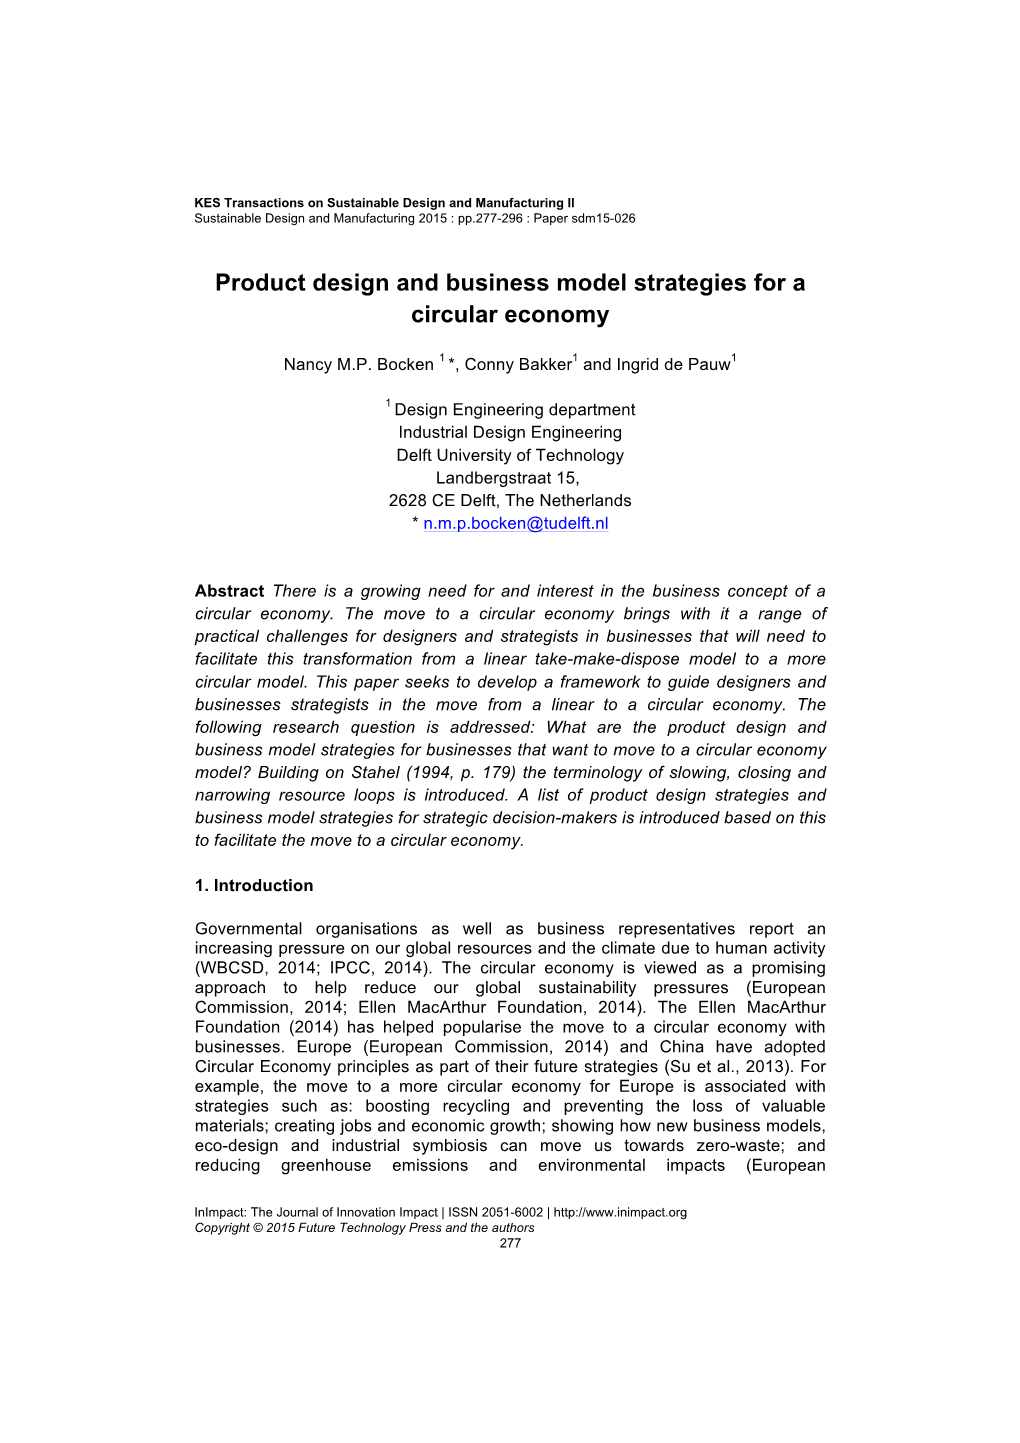 Product Design and Business Model Strategies for a Circular Economy